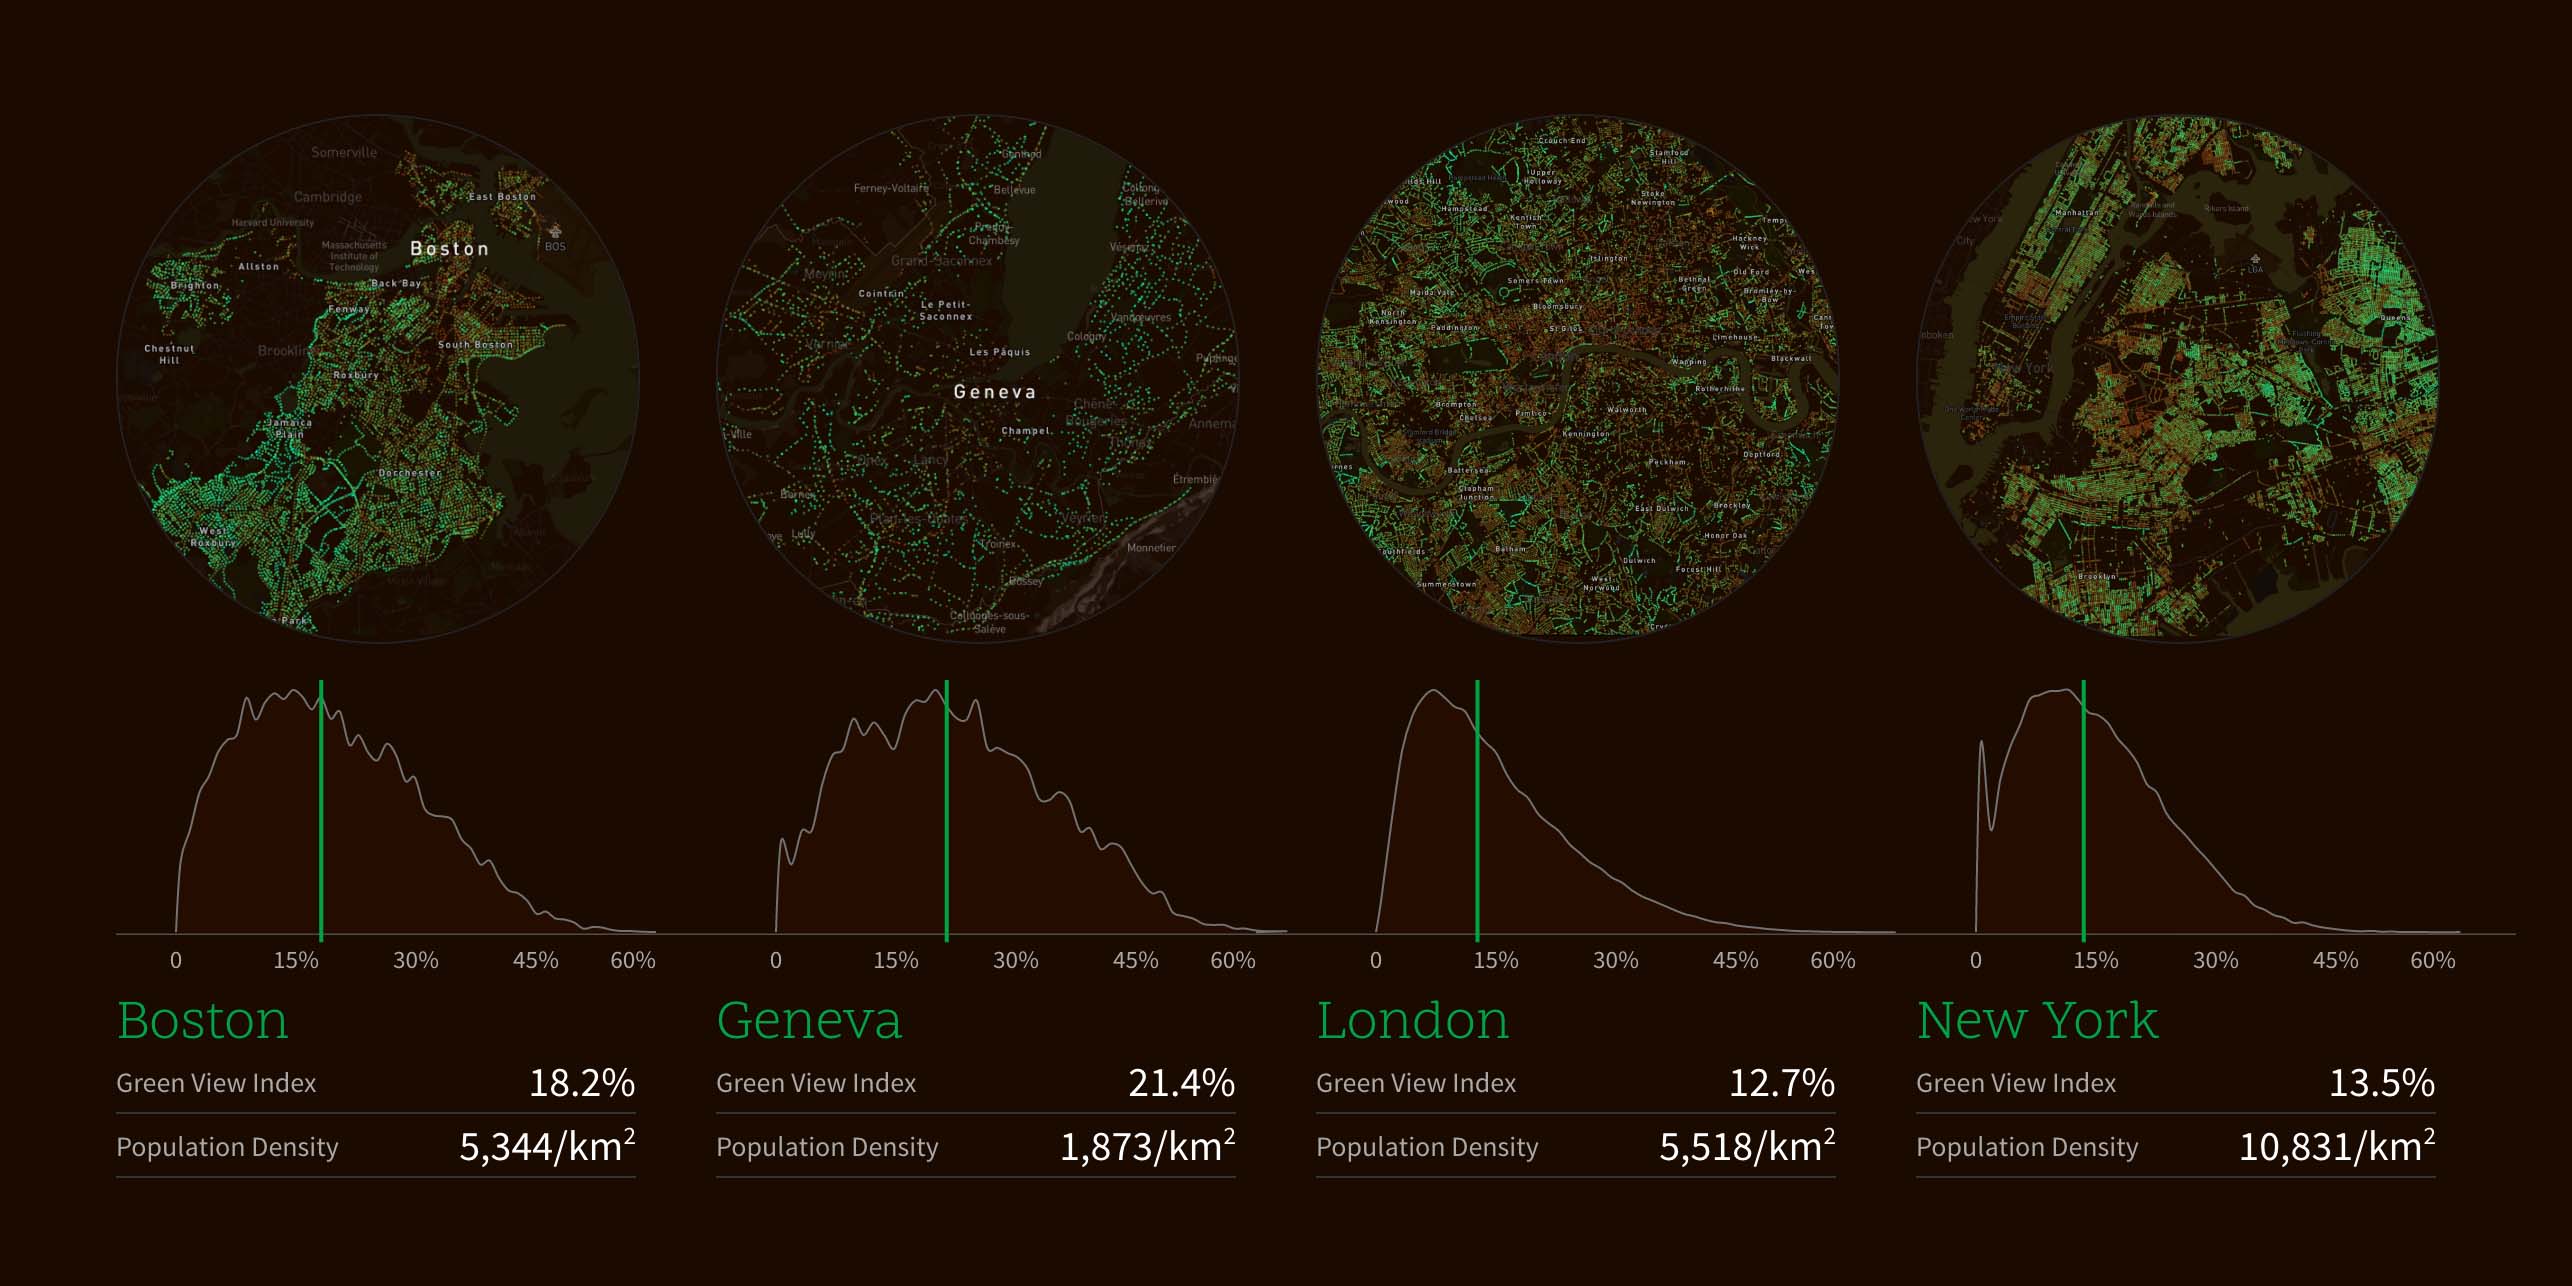 Treepedia compares canopy coverage in world cities. Image: MIT Senseable City Lab.